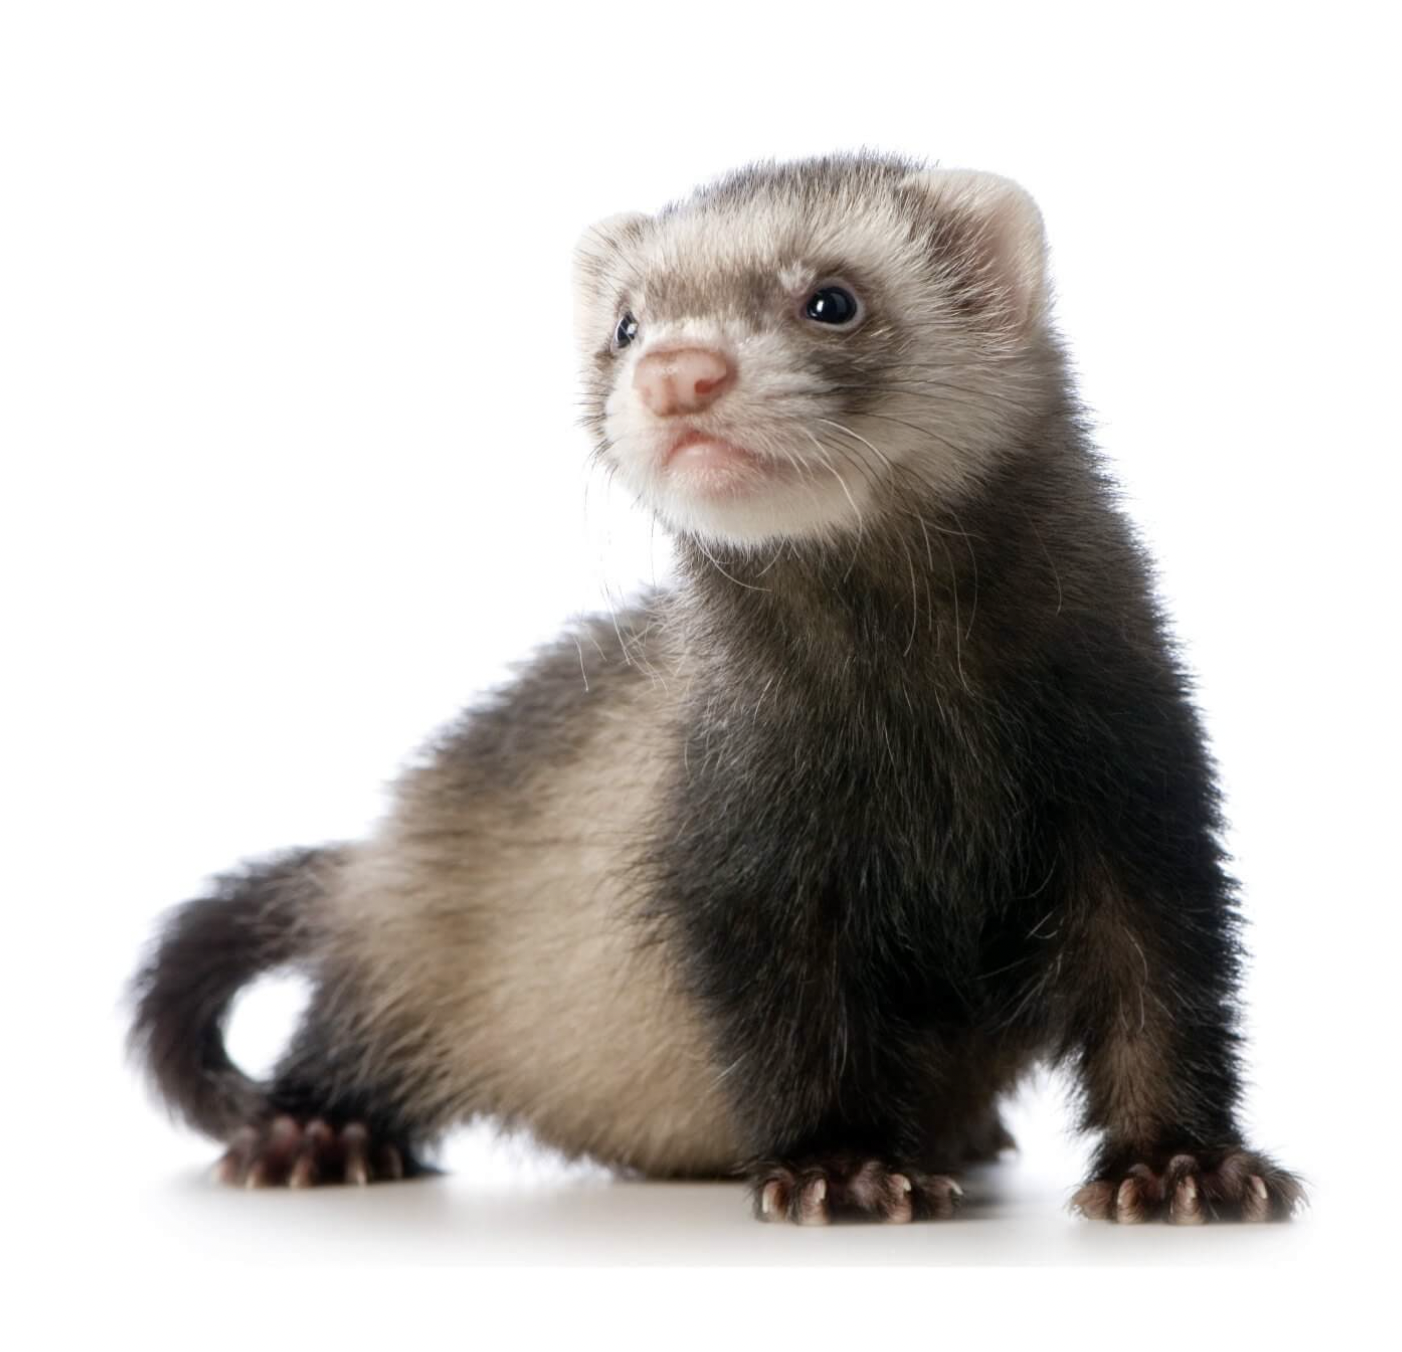 “Ferrets: If female ferrets go into heat and do not get pregnant, they die from estrogen build up. If this happened to human girls... high school would be like the hunger games.”